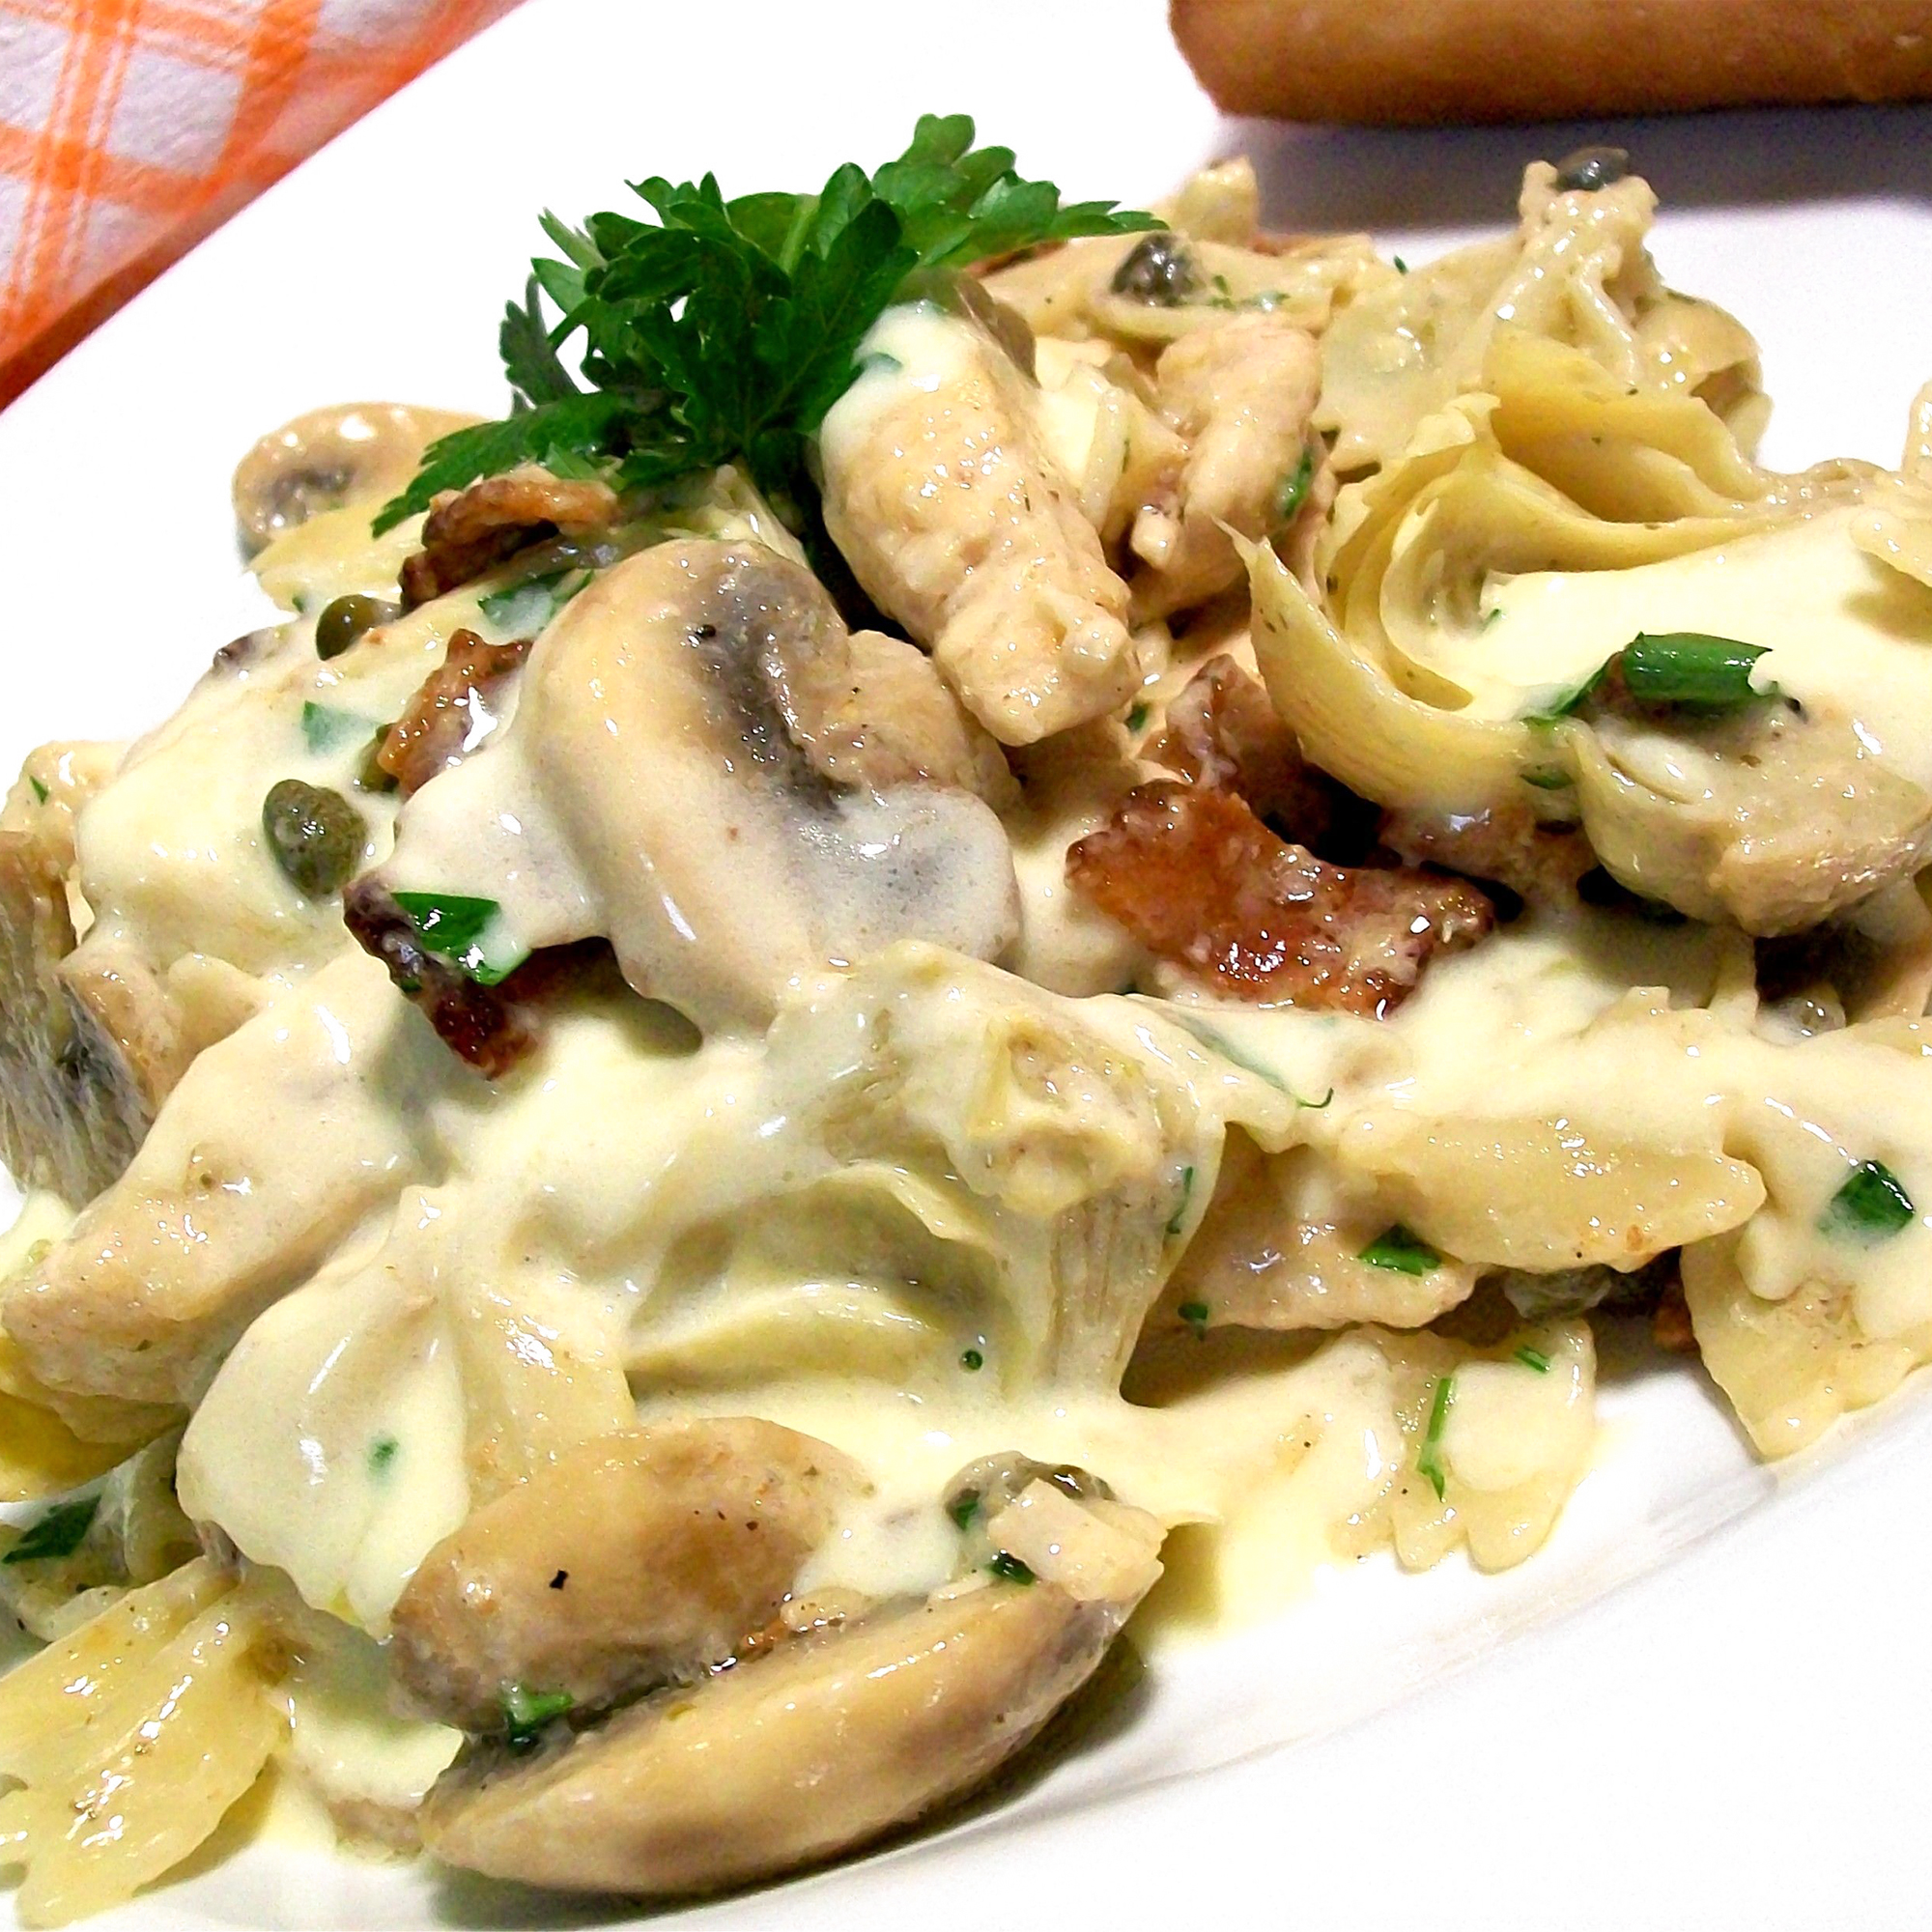 close up view of Italian Lemon Butter Chicken with mushrooms and artichokes garnished with fresh herbs on a plate